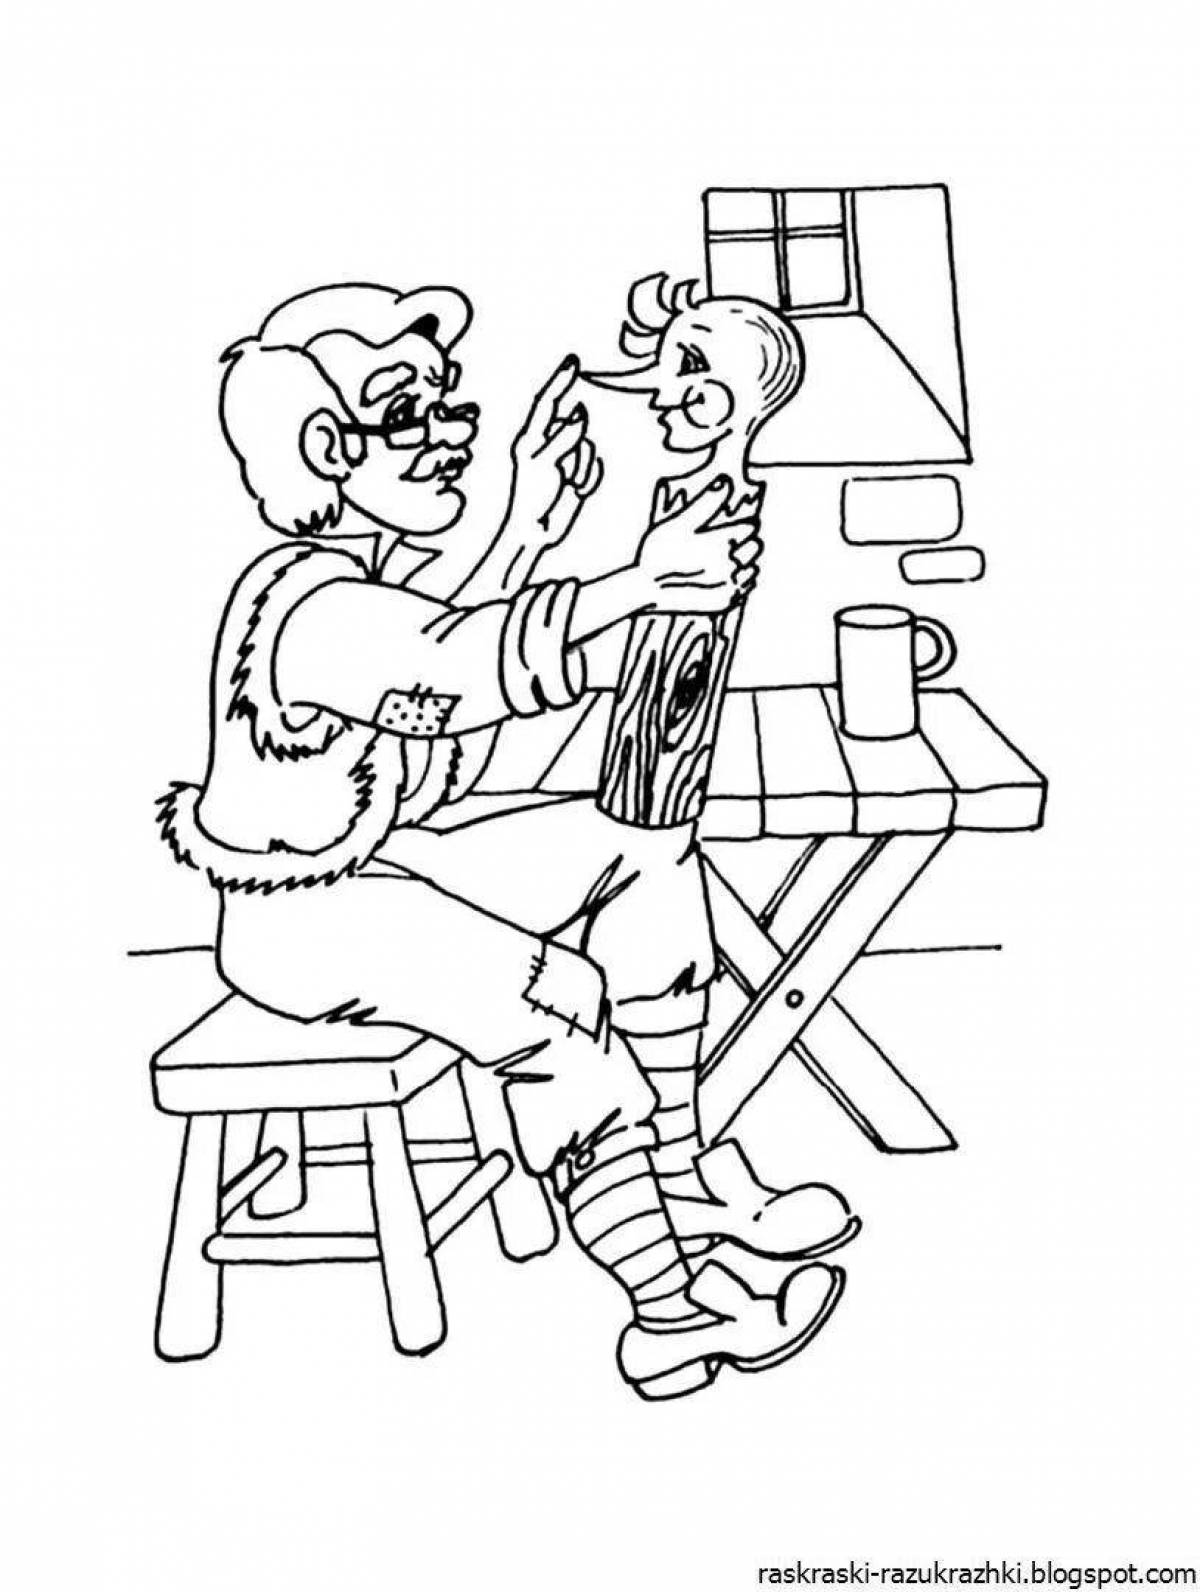 Coloring page dazzling pinocchio